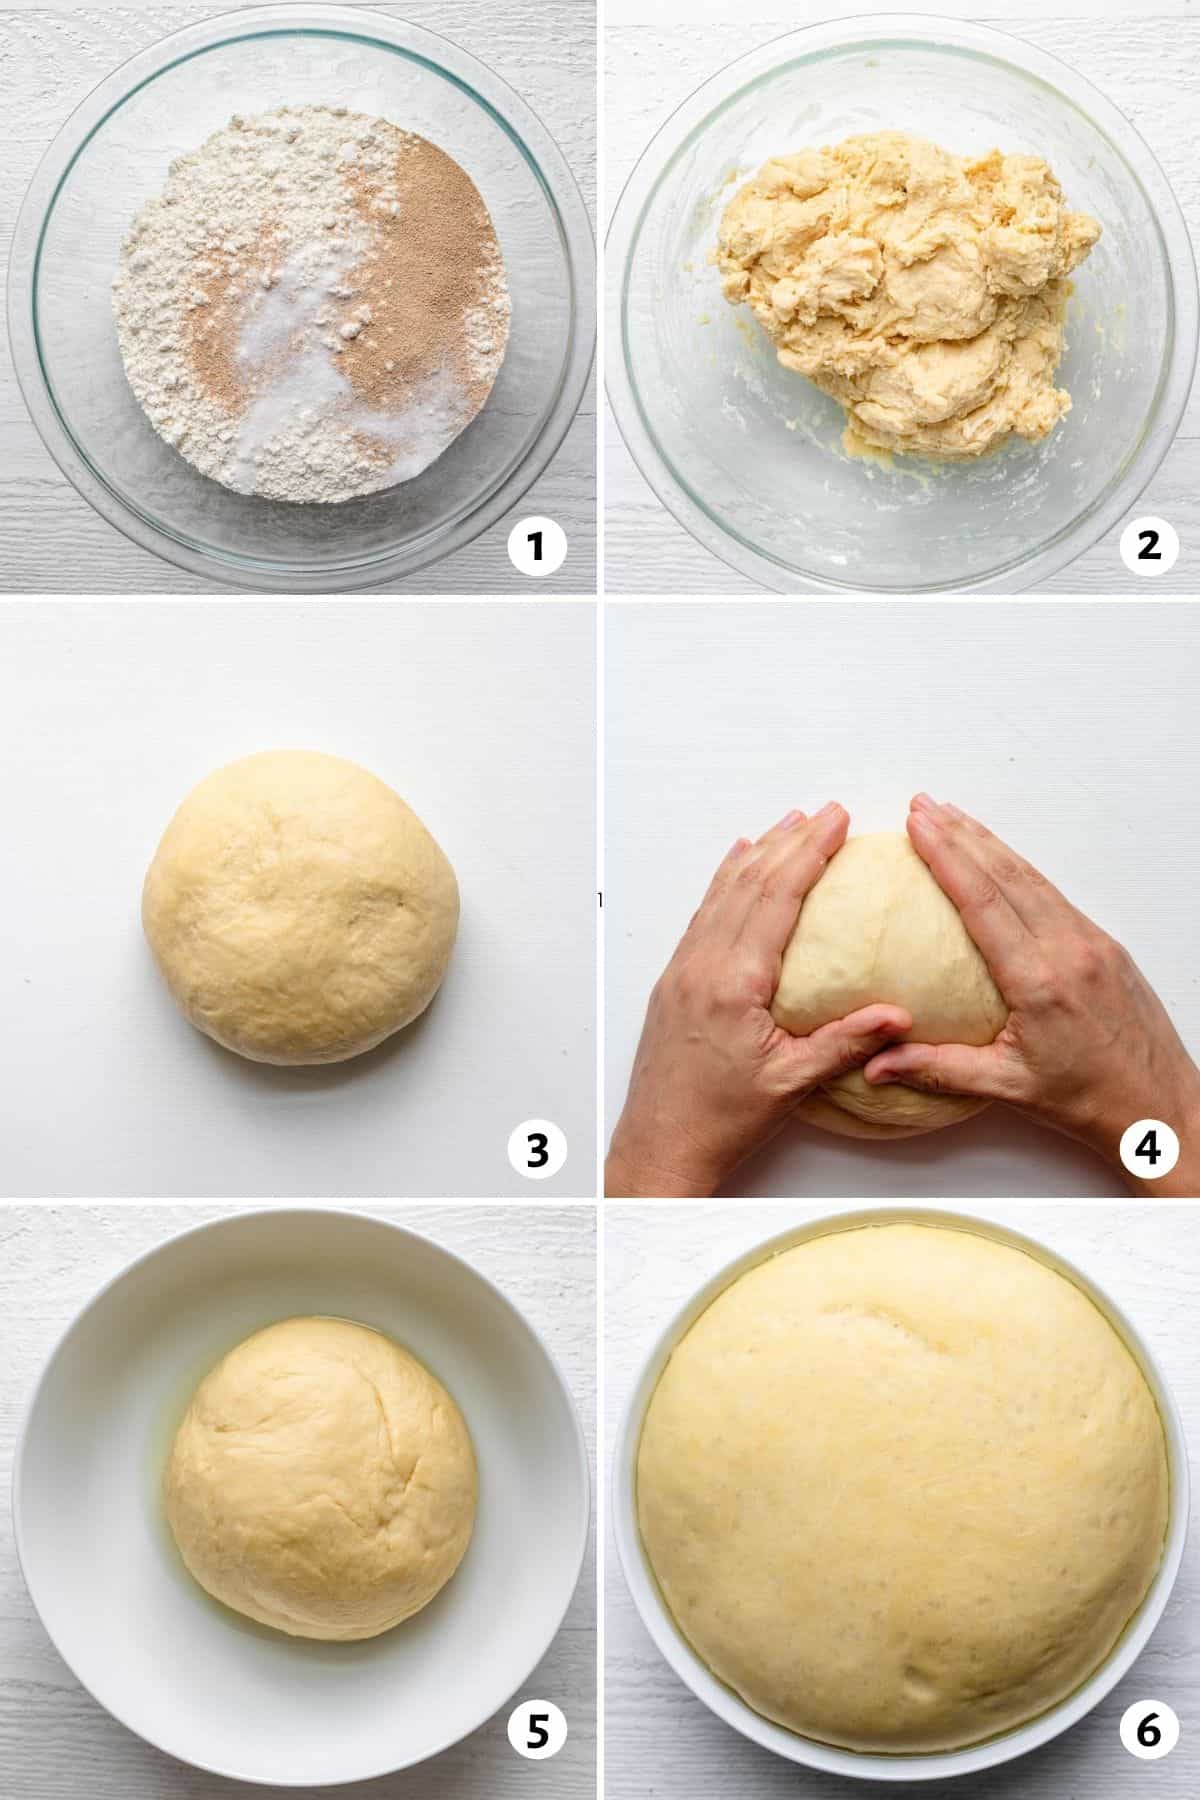 6 image collage showing the steps to make the dough from mixing the flour to kneading dough and letting it rise